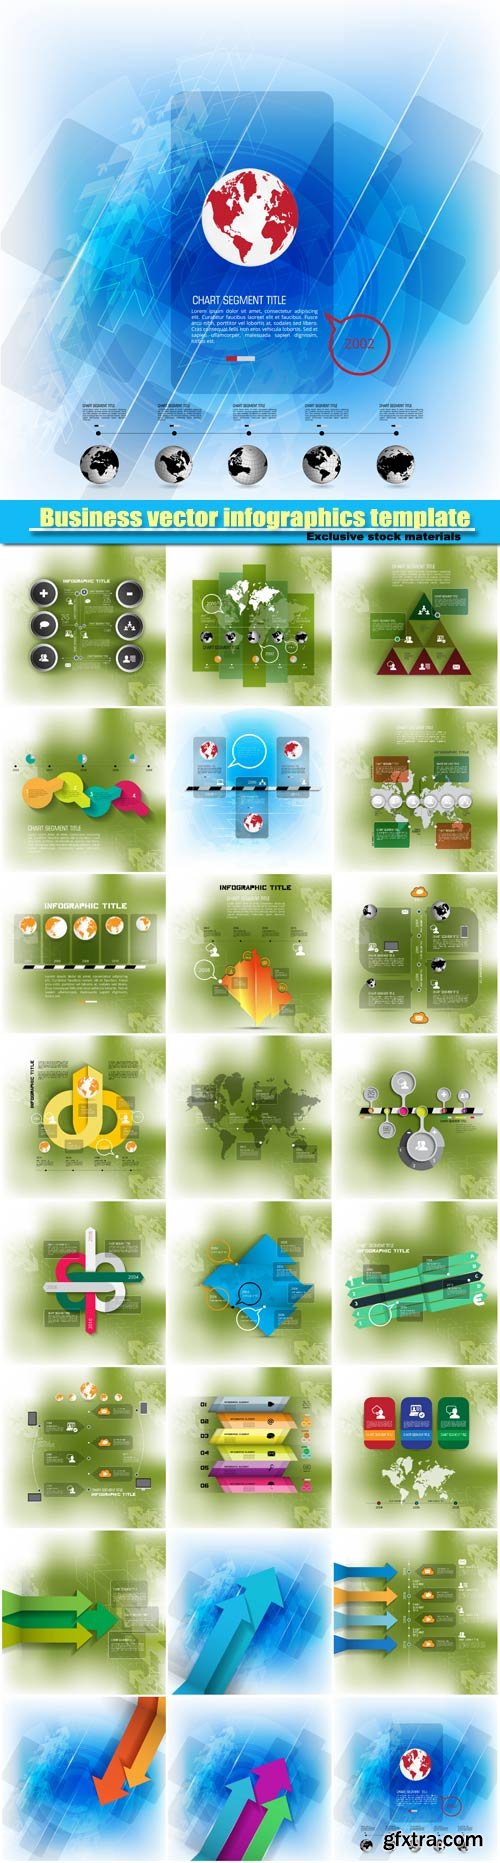 Business vector infographics template